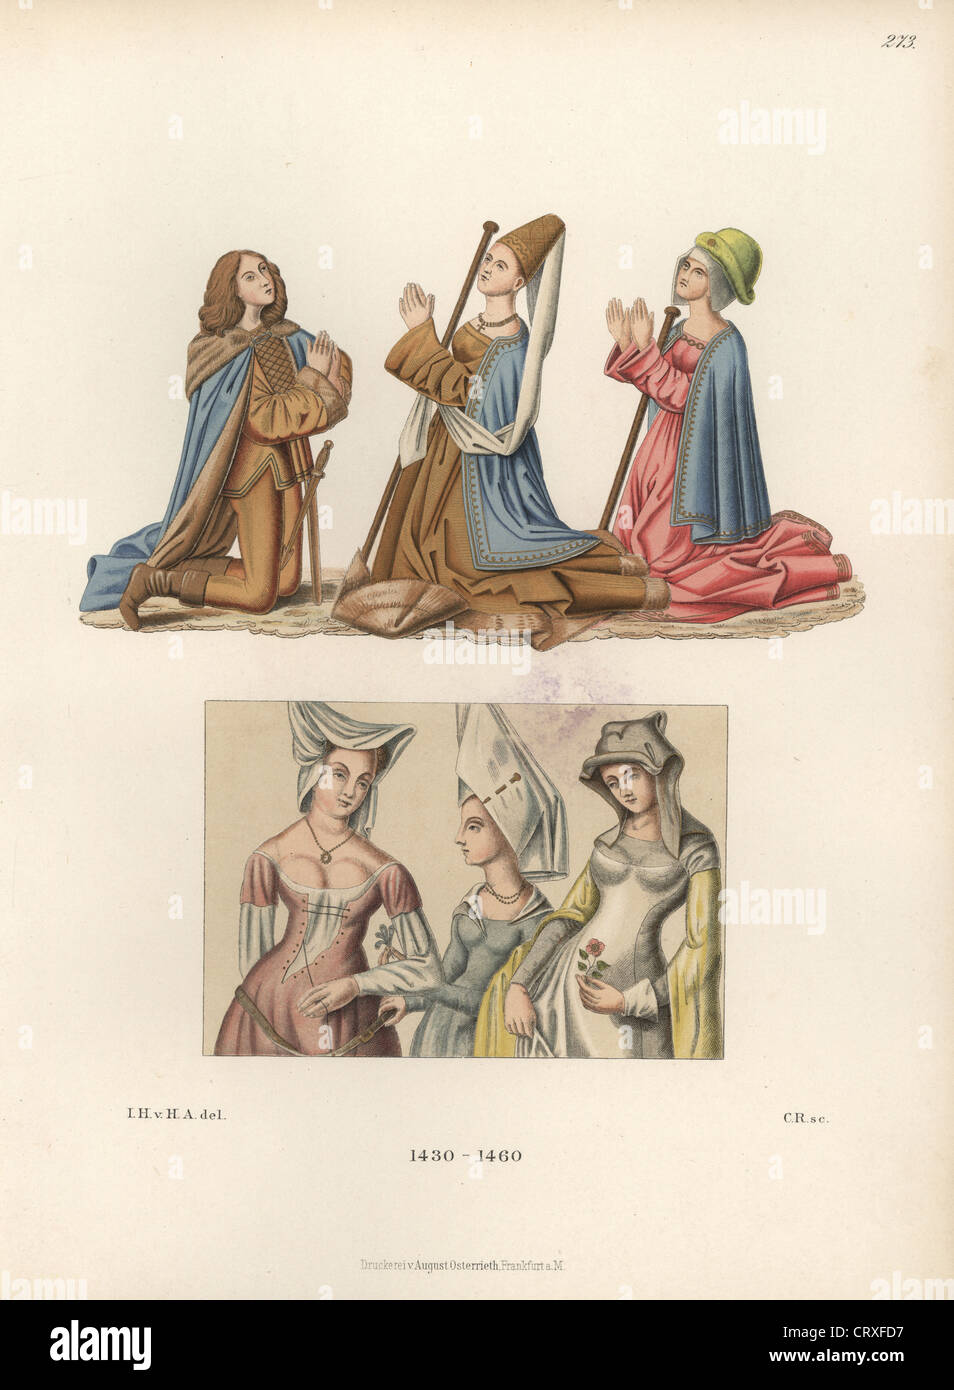 Male and female fashion from the mid 15th century. Stock Photo